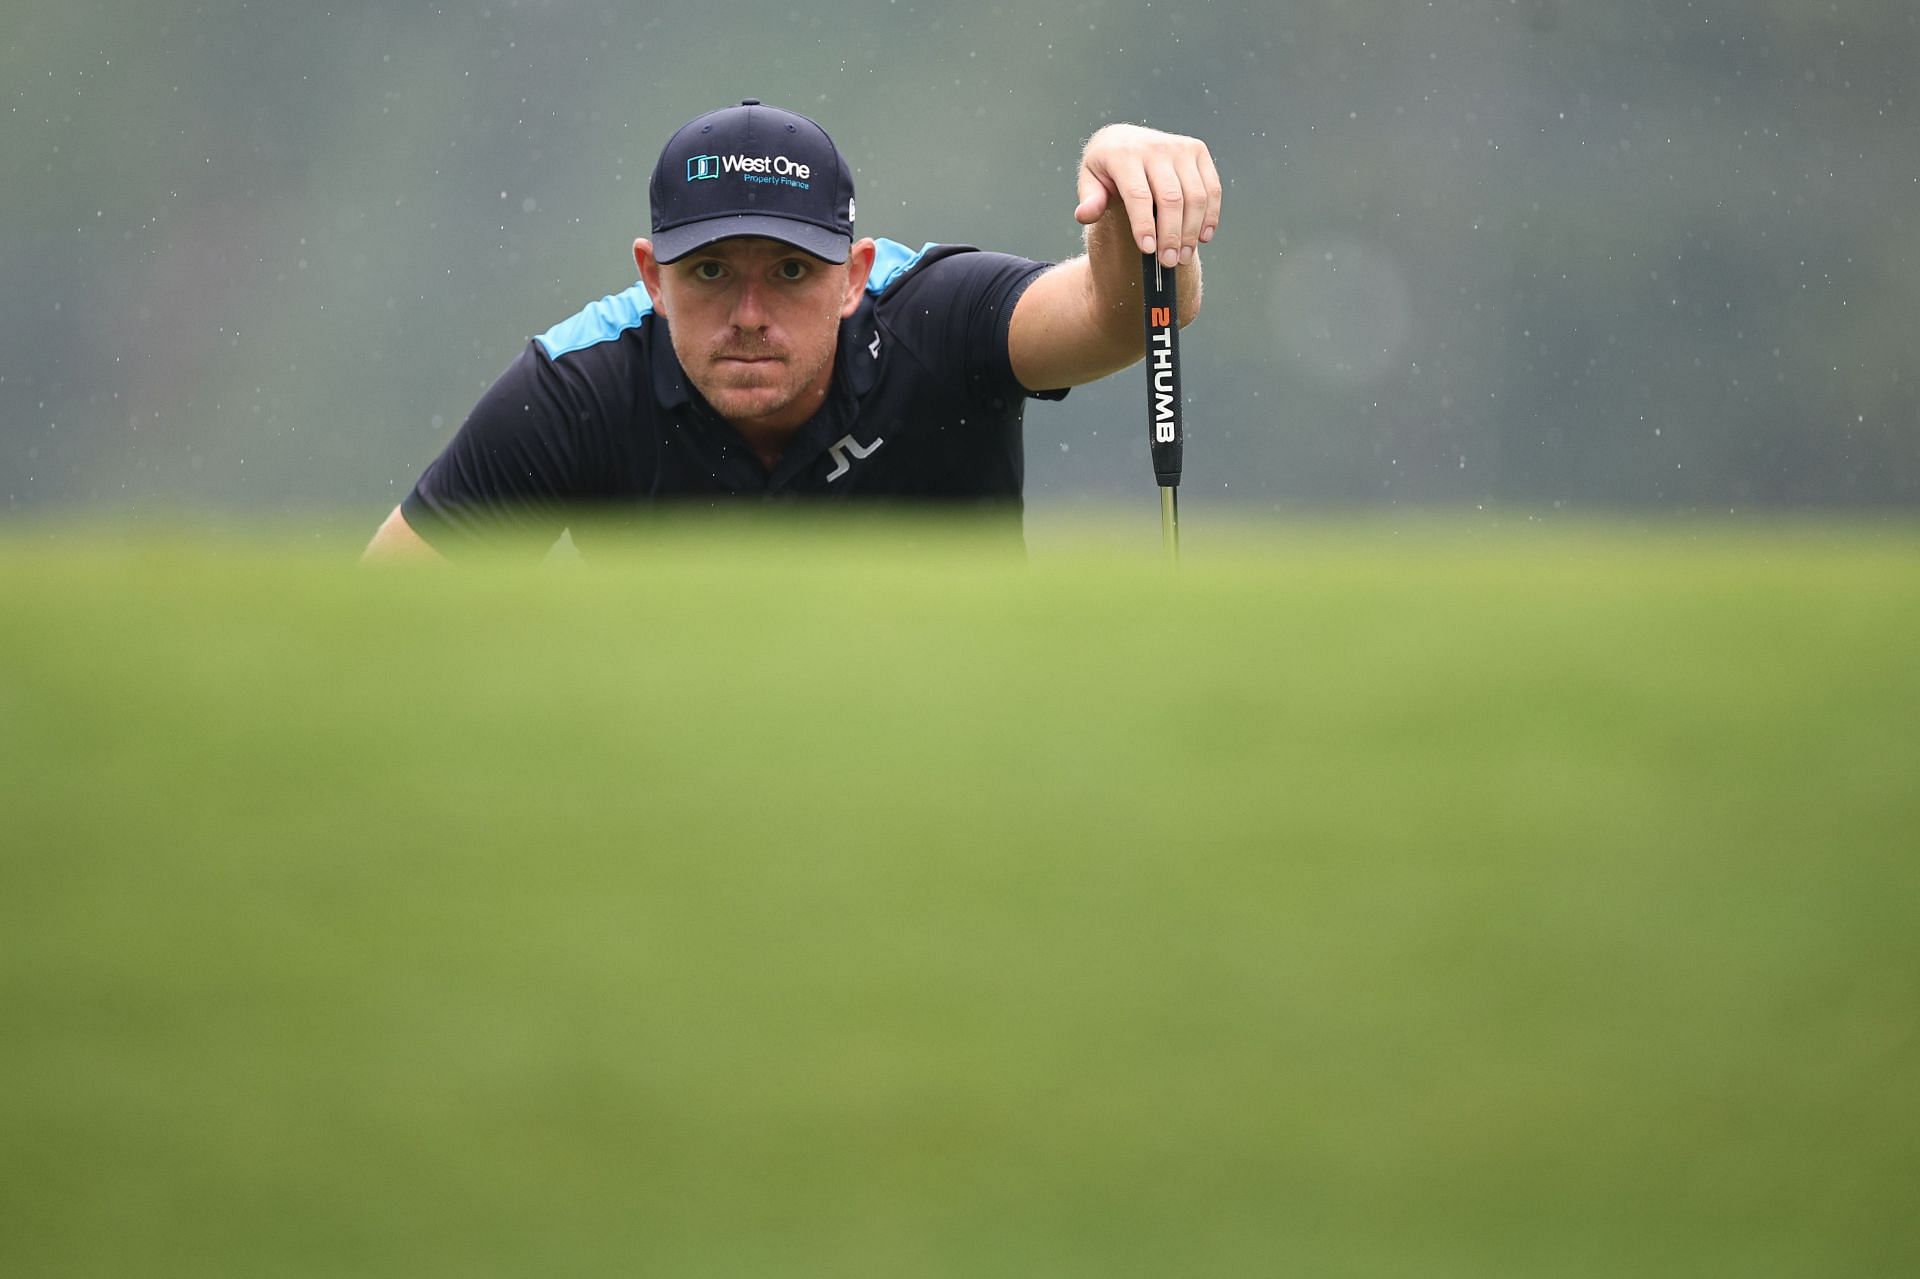 Matt Wallace finished the first round of the Wyndham Championship at 3-under 67